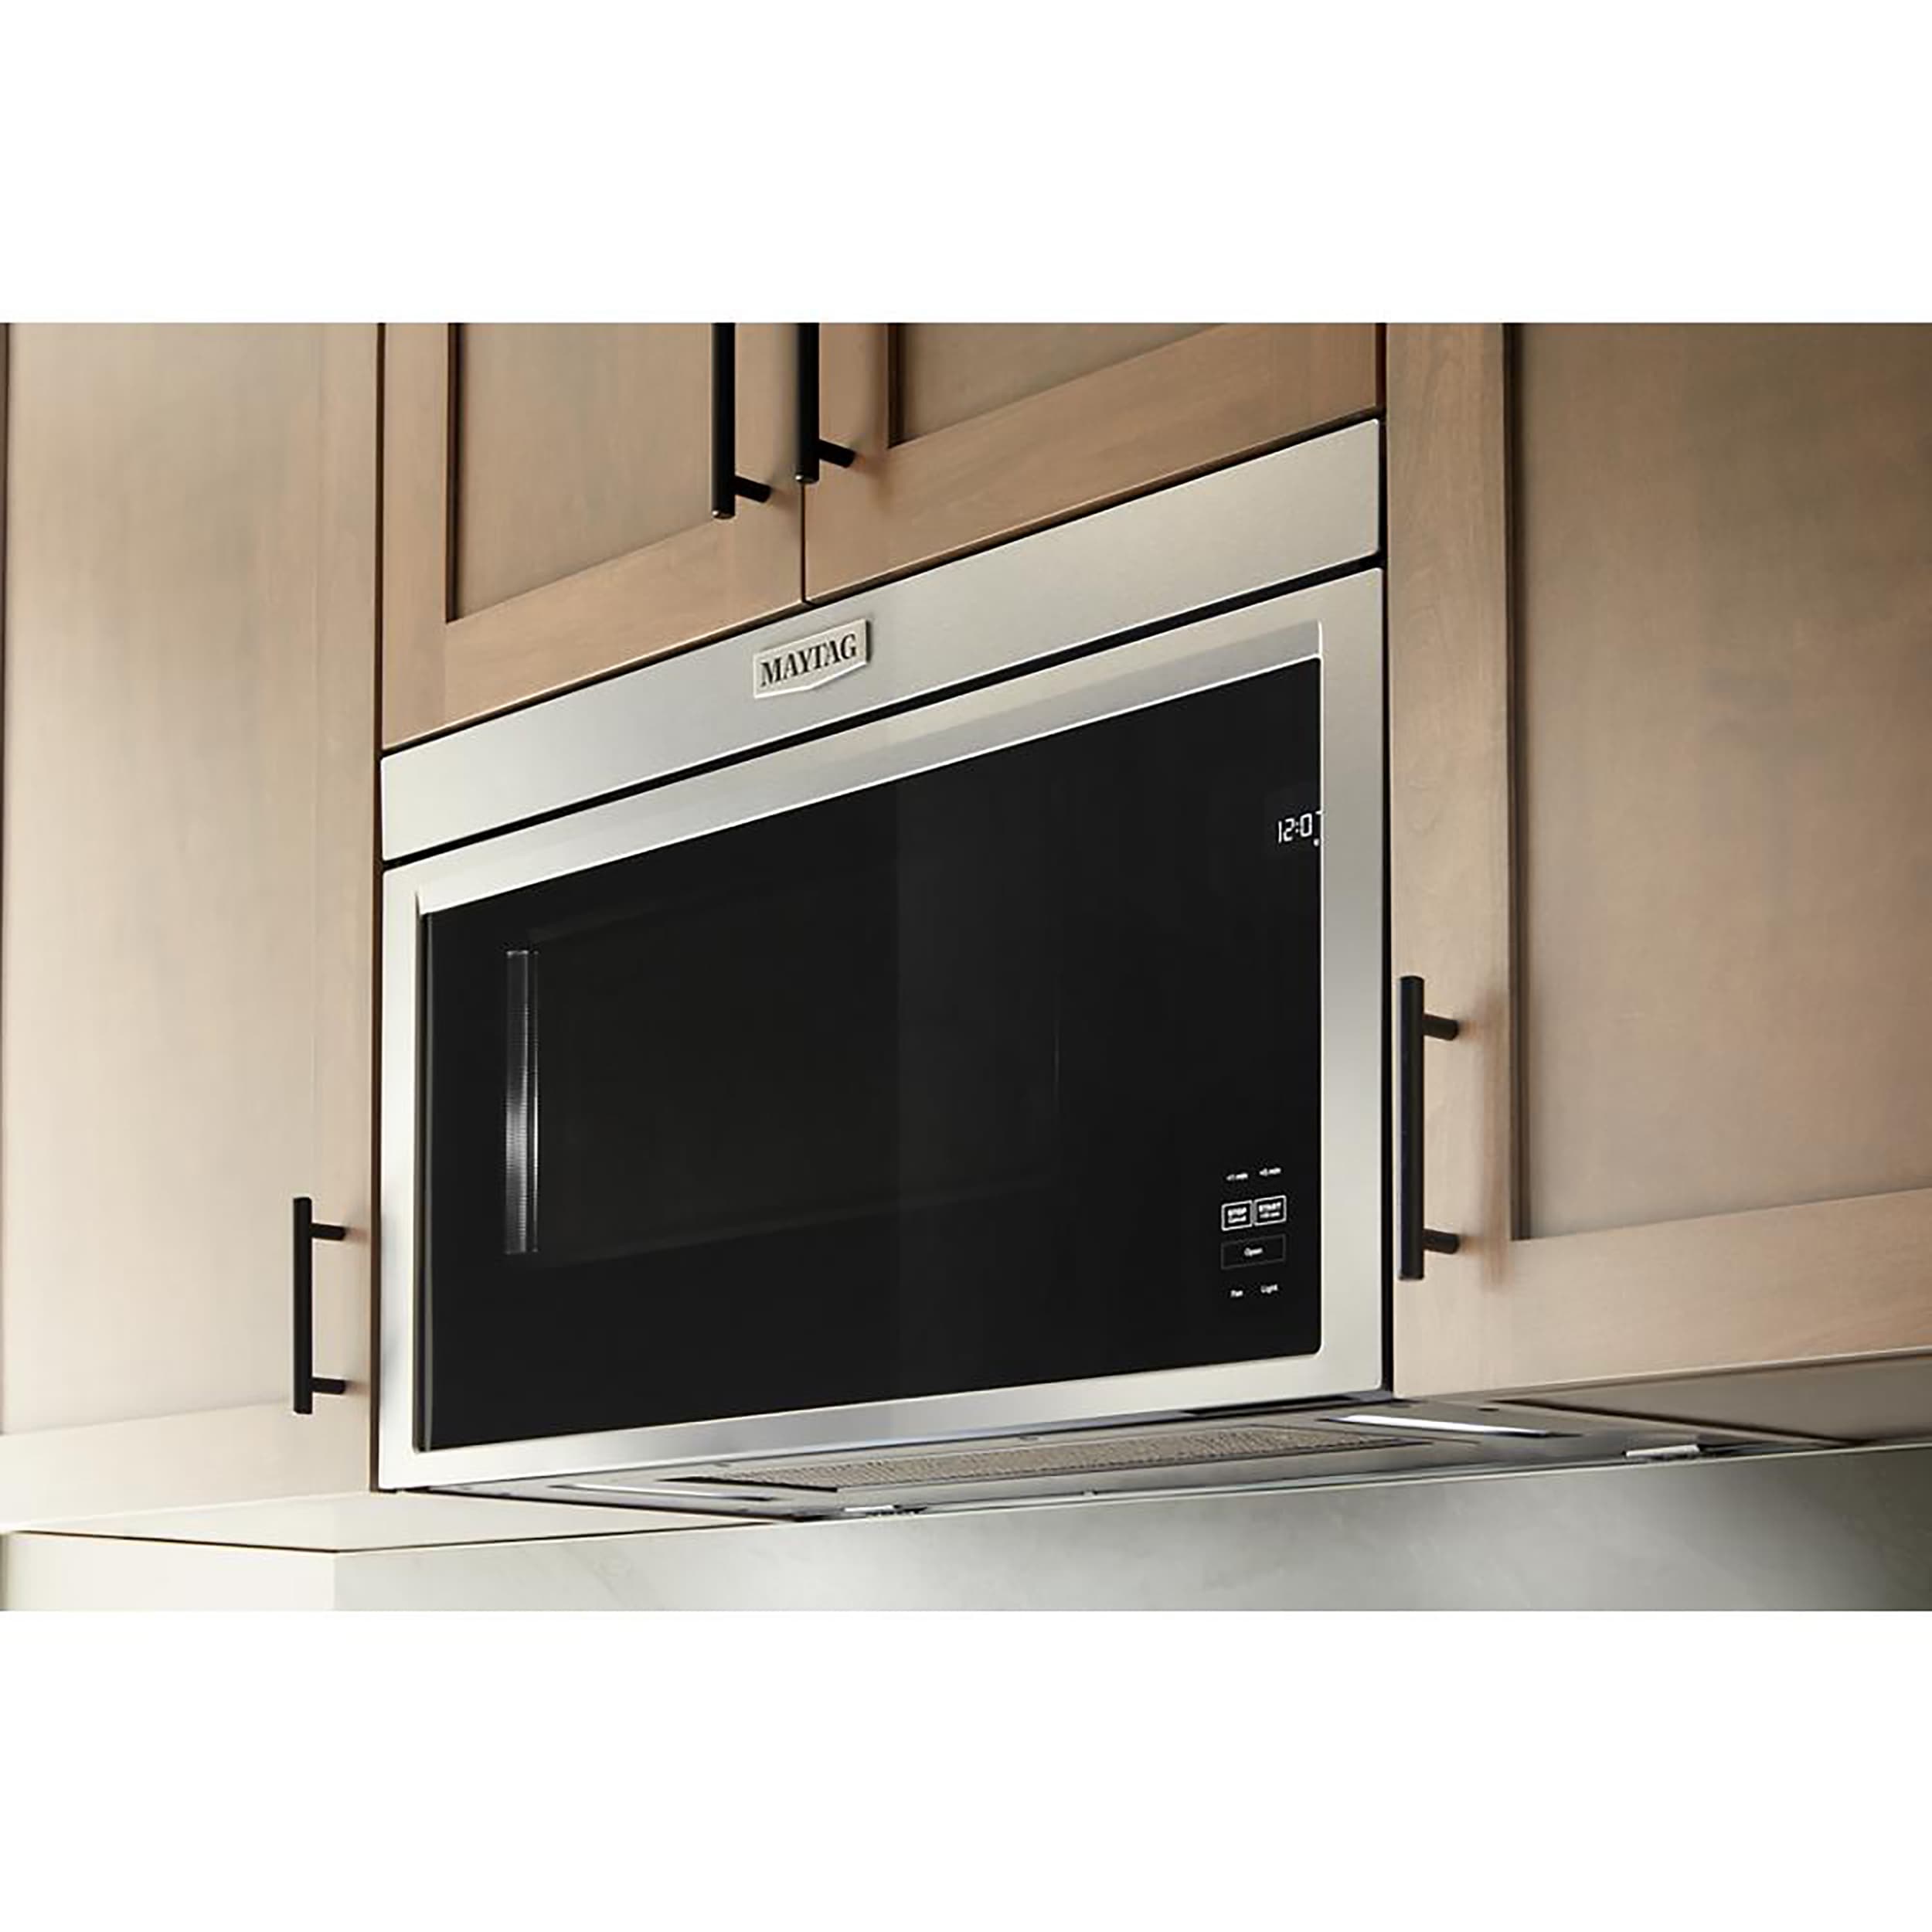 Maytag MMV6180WS 1.8 cu. ft. Over-The-Range Microwave with 1100 Watts,  Five-Speed 300 CFM Venting System, 10 Power Levels, Sensor and Convection  Cooking Options, Stainless Steel Interior and Incandescent Cooktop  Lighting: Stainless Steel